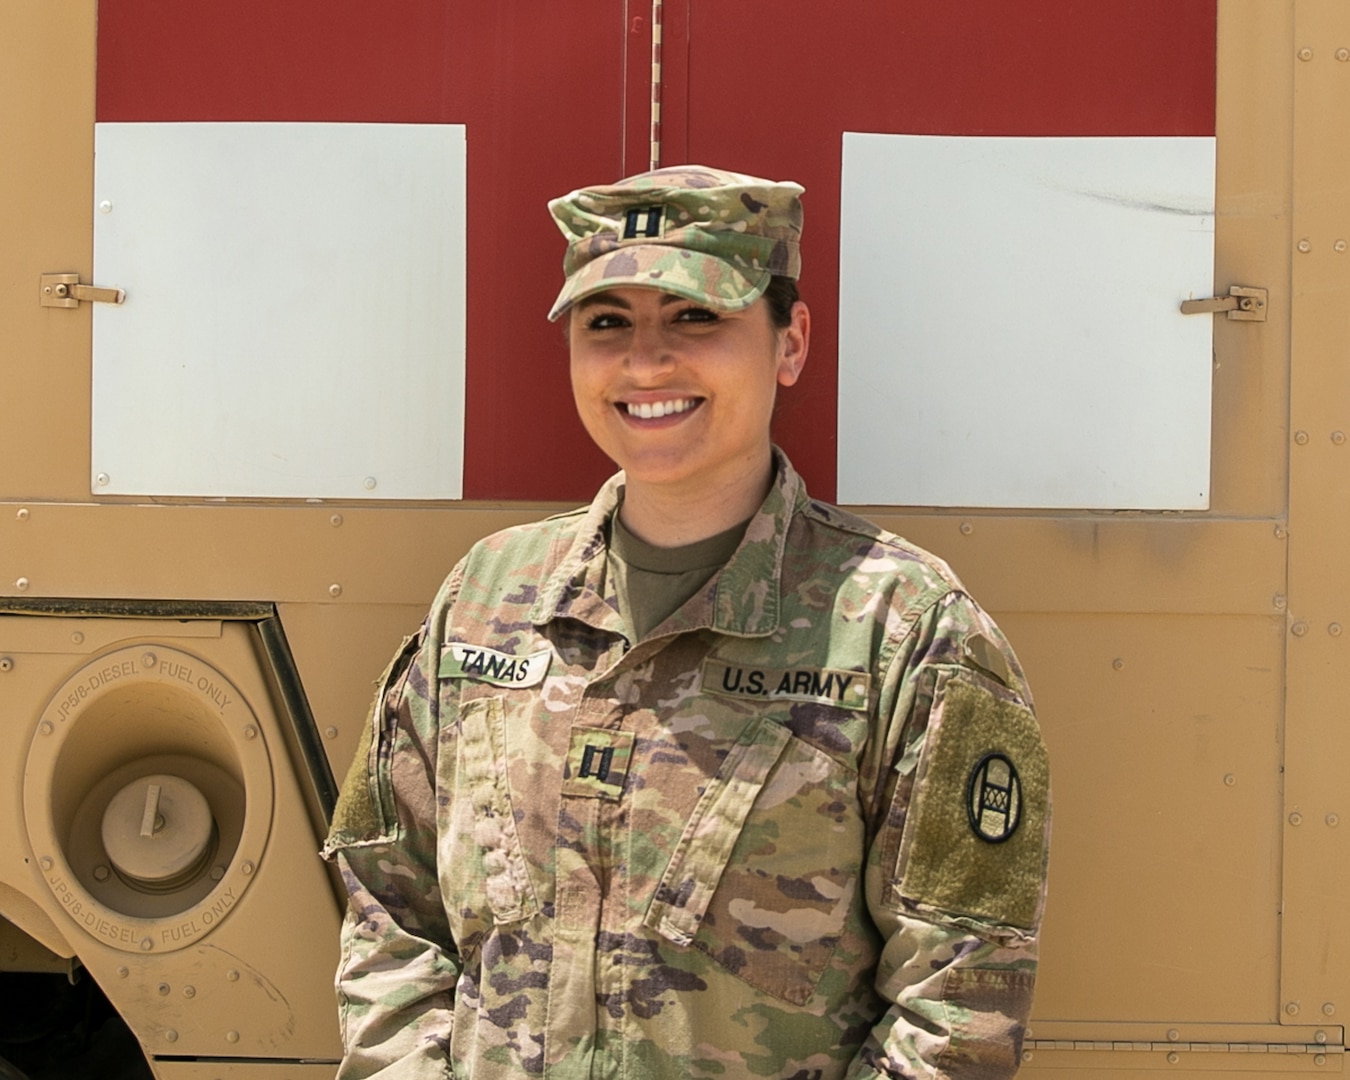 U.S. Army Capt. Eve Tanas, an Army nurse supporting Operation Spartan Shield in the Central Command area of responsibility, April 28, 2020. Tanas, assigned to the 230th Brigade Support Battalion, 30th Armored Brigade Combat Team, North Carolina National Guard, is recognized as a Soldier spotlight during National Nurses Week May 6-12, 2020.